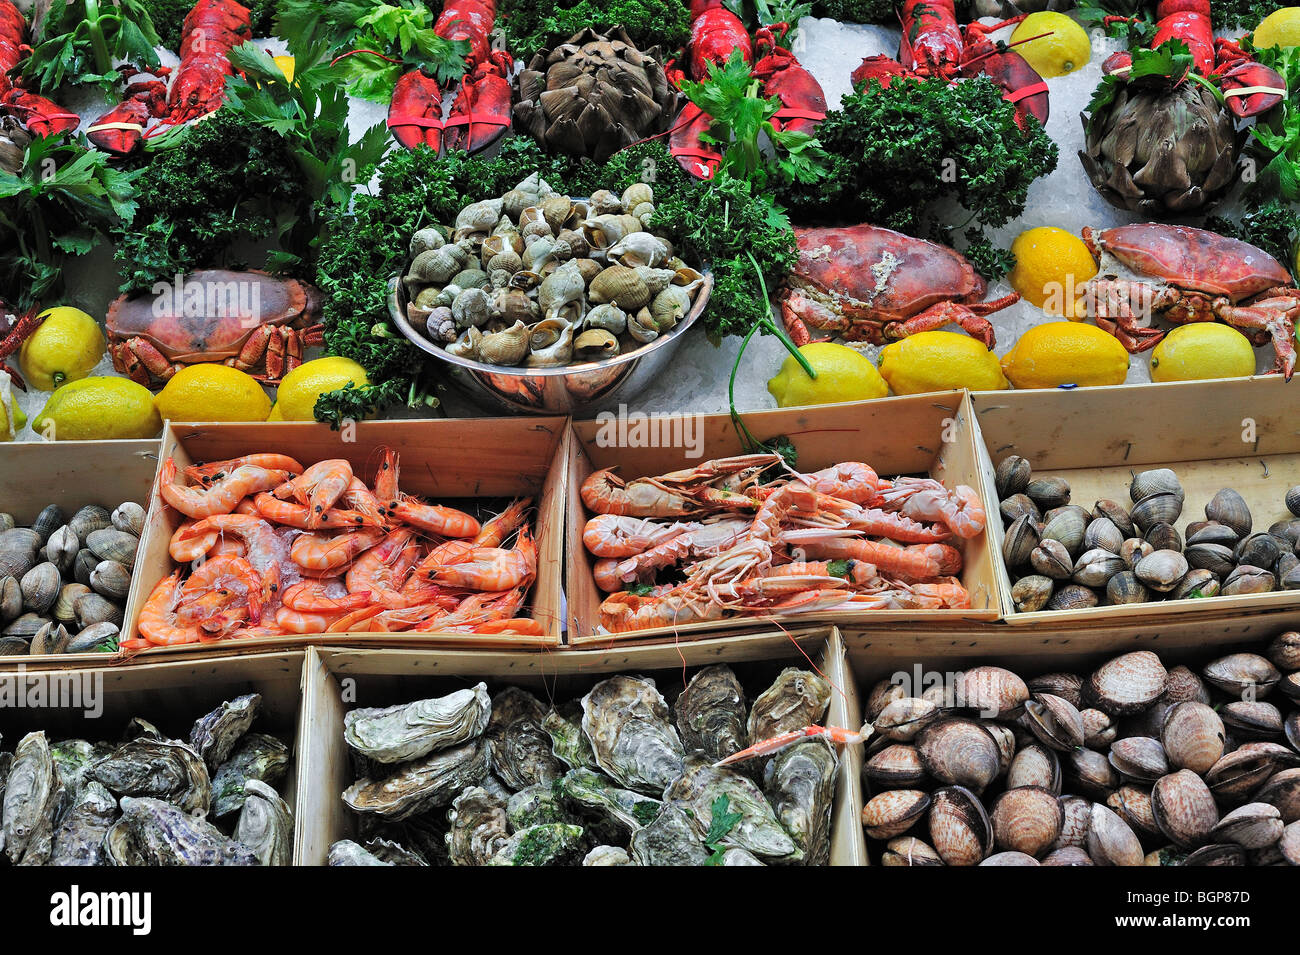 Shellfish / fruits de mer on display with oysters, scampis, crabs and lobsters Stock Photo